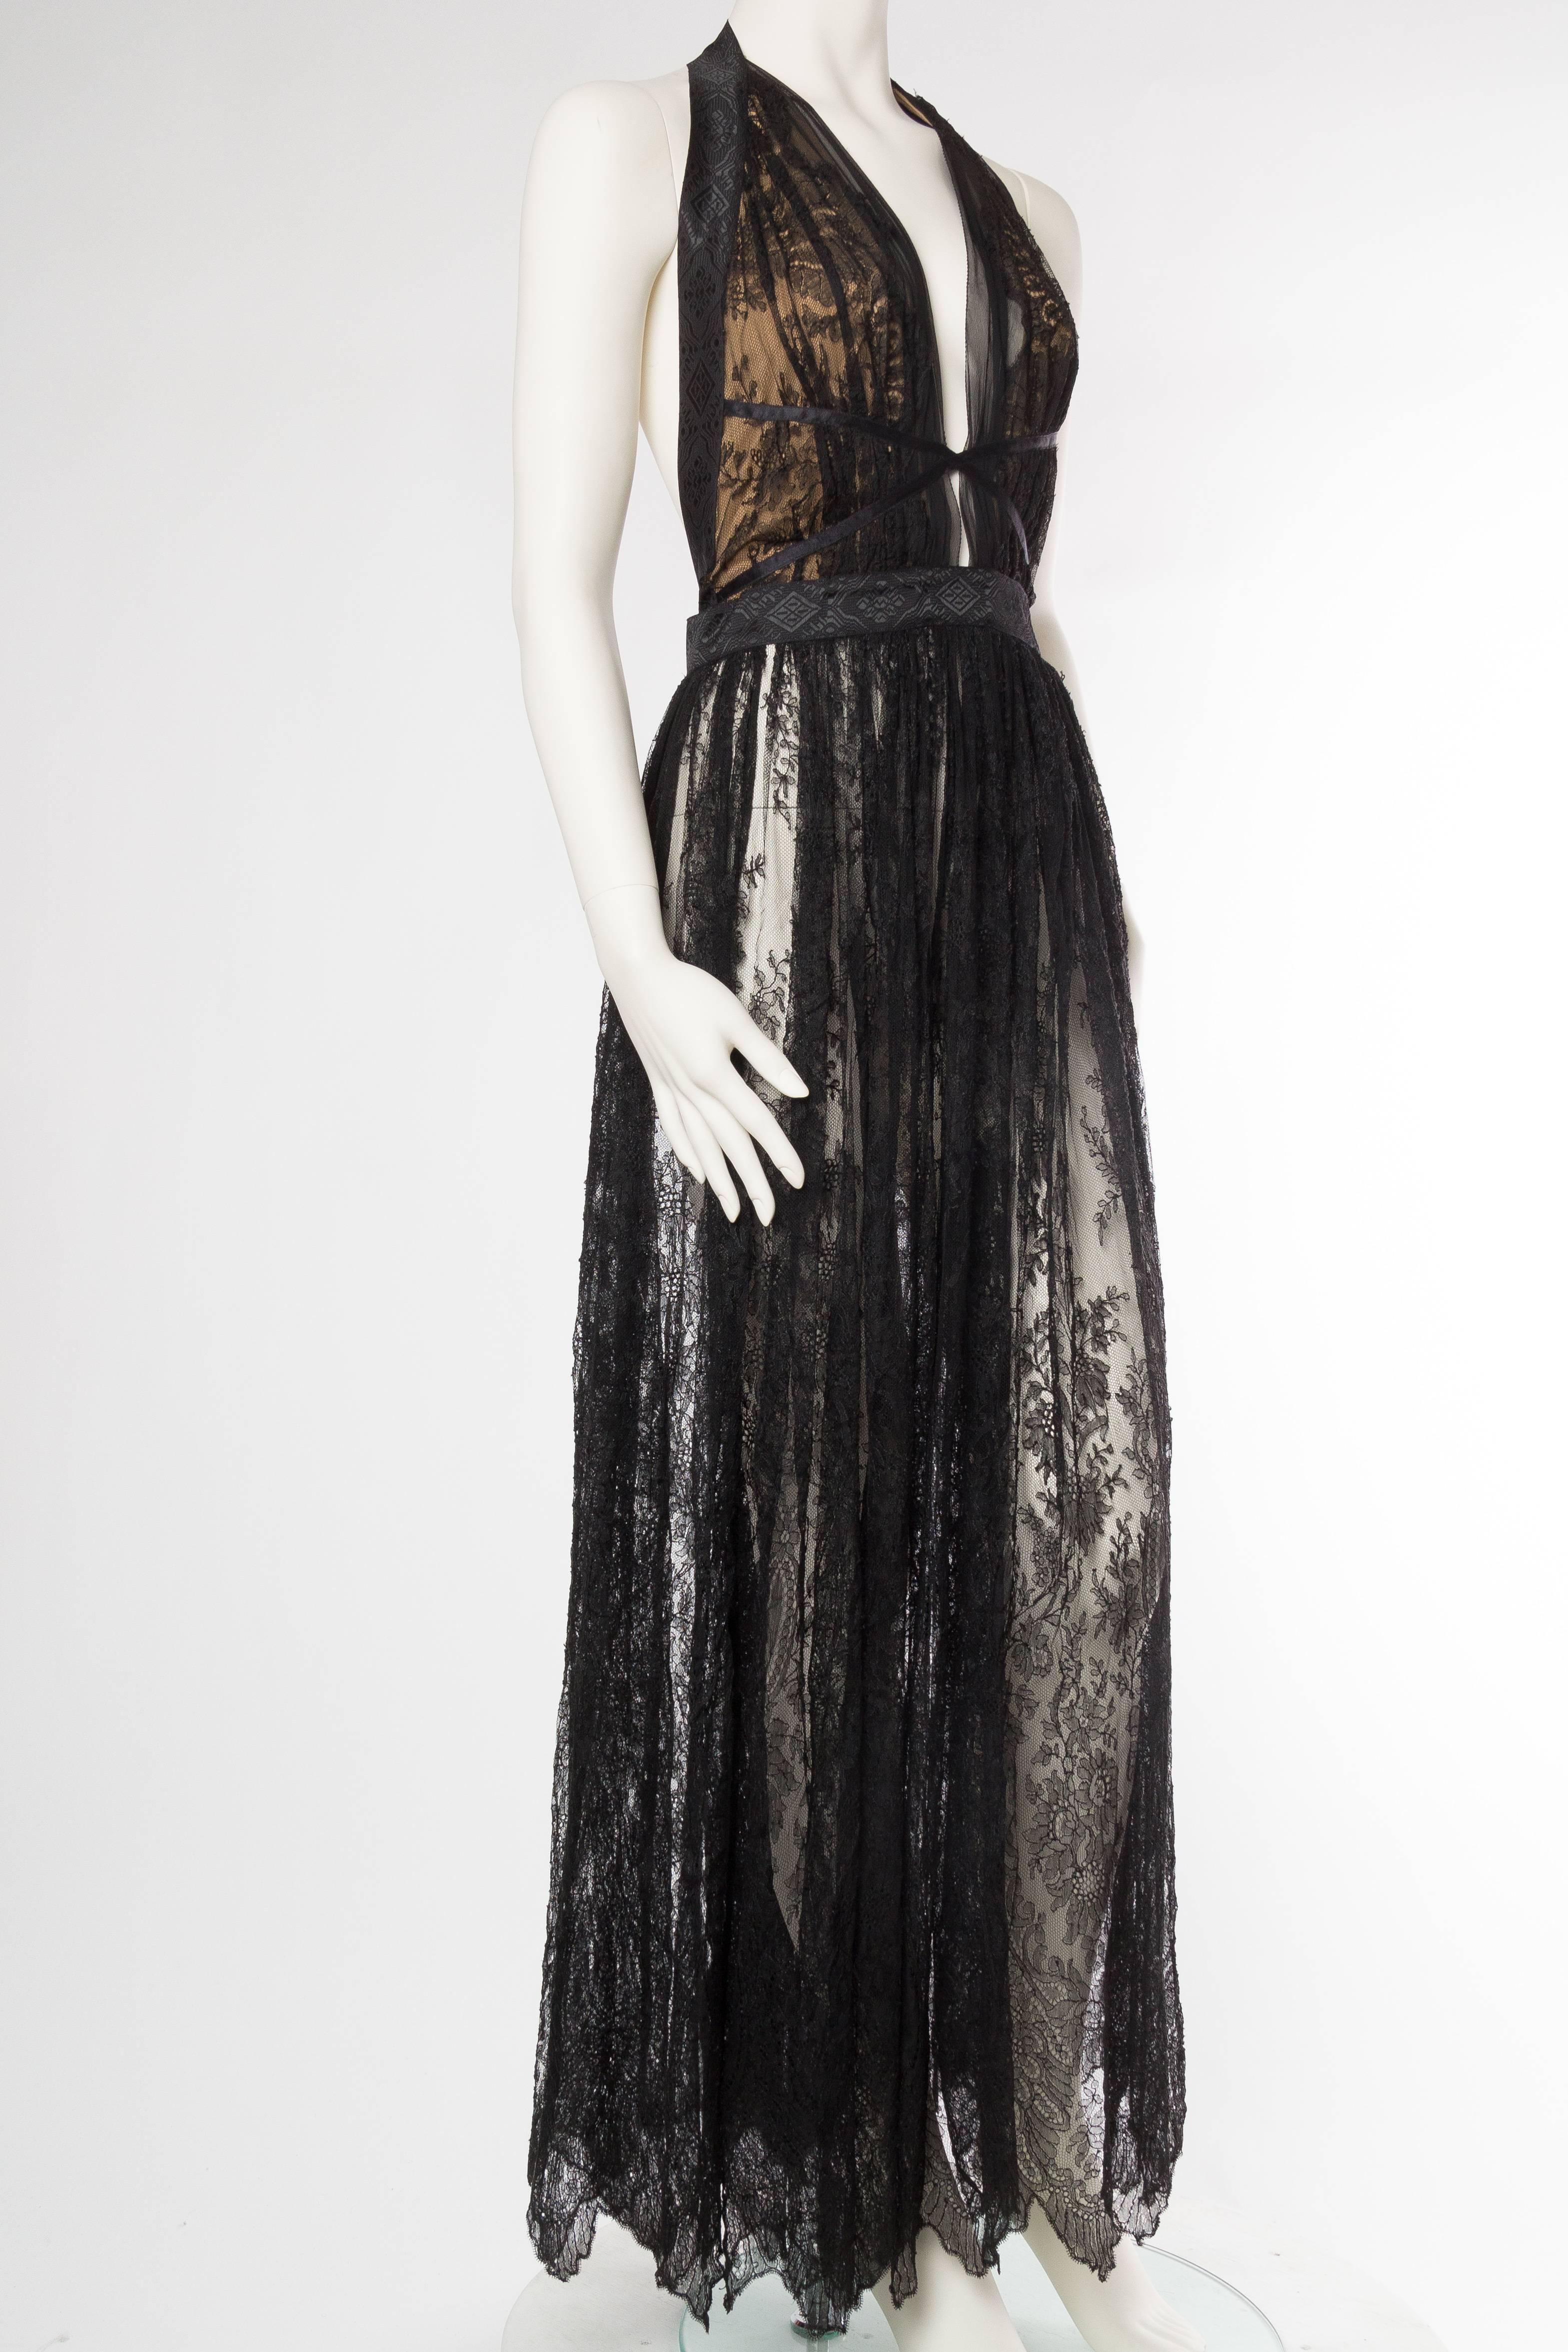 Inspired by the 1930s work of Madeline Vionnet who's work was most commonly knocked off by Halston in the 1970s. This gown is made from Victorian silk chantilly lace. The full sweep of the skirt is glorious. The skirt has been left unlined for a